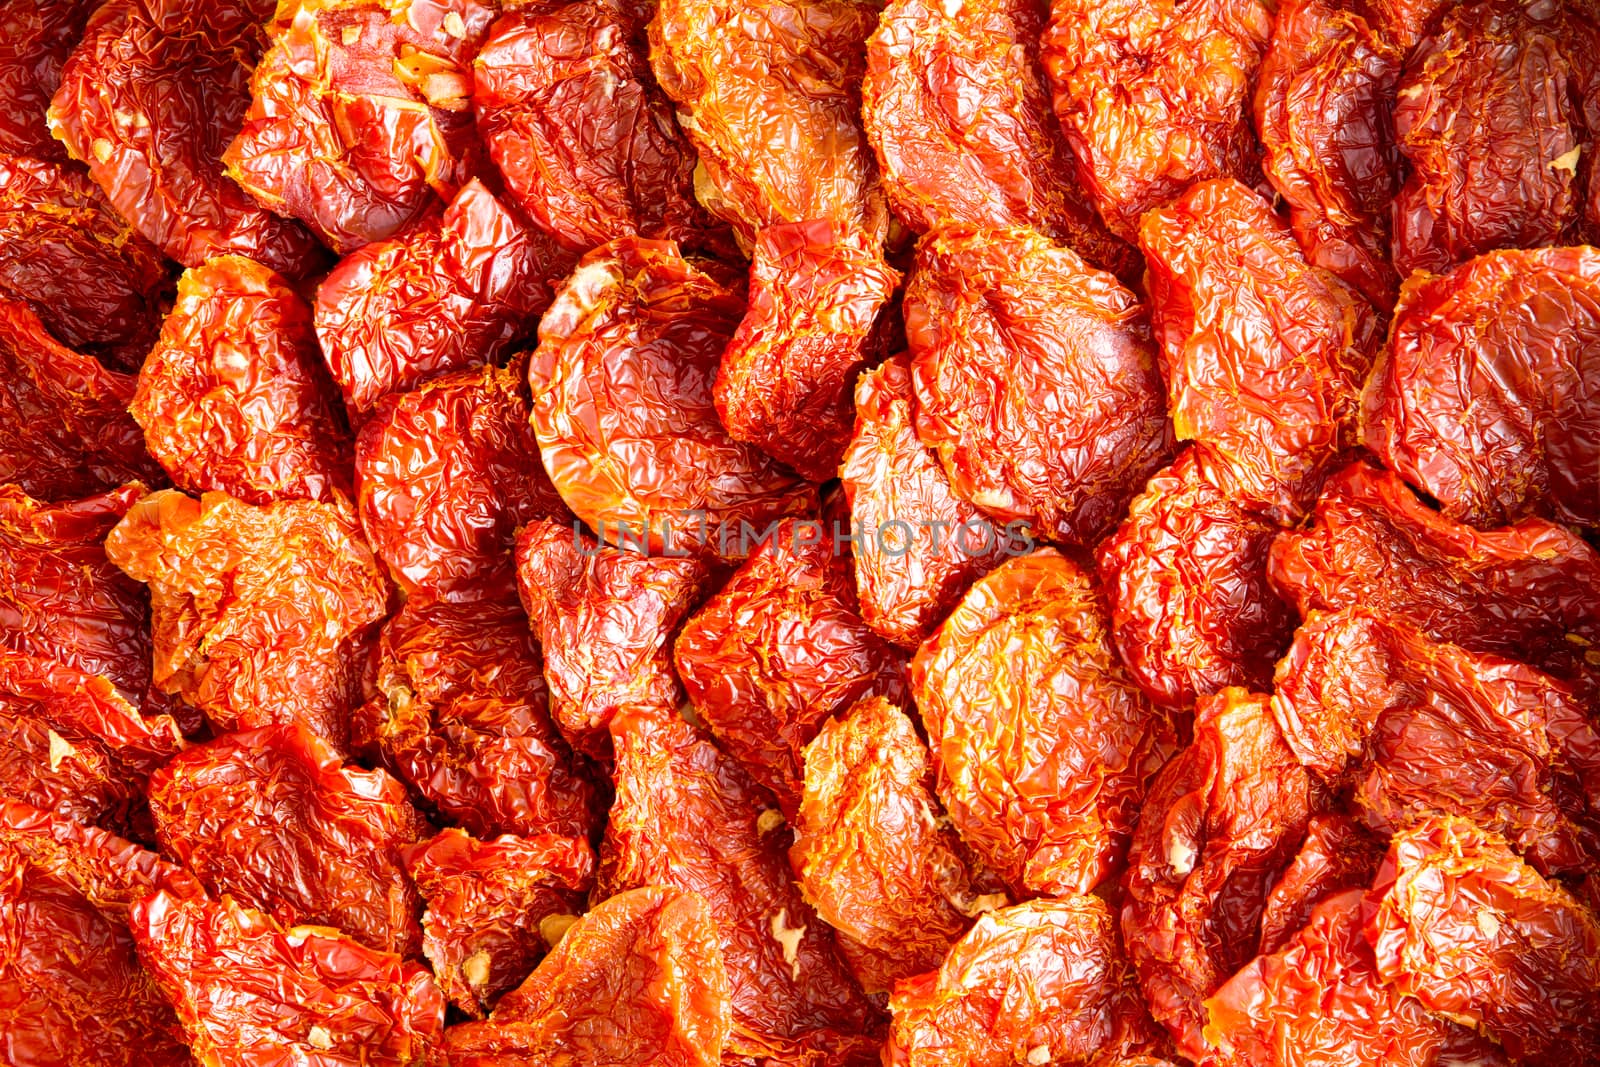 Background texture of neatly arranged ripe red sundried tomatoes, a healthy snack and appetizer rich in antioxidants and vitamins